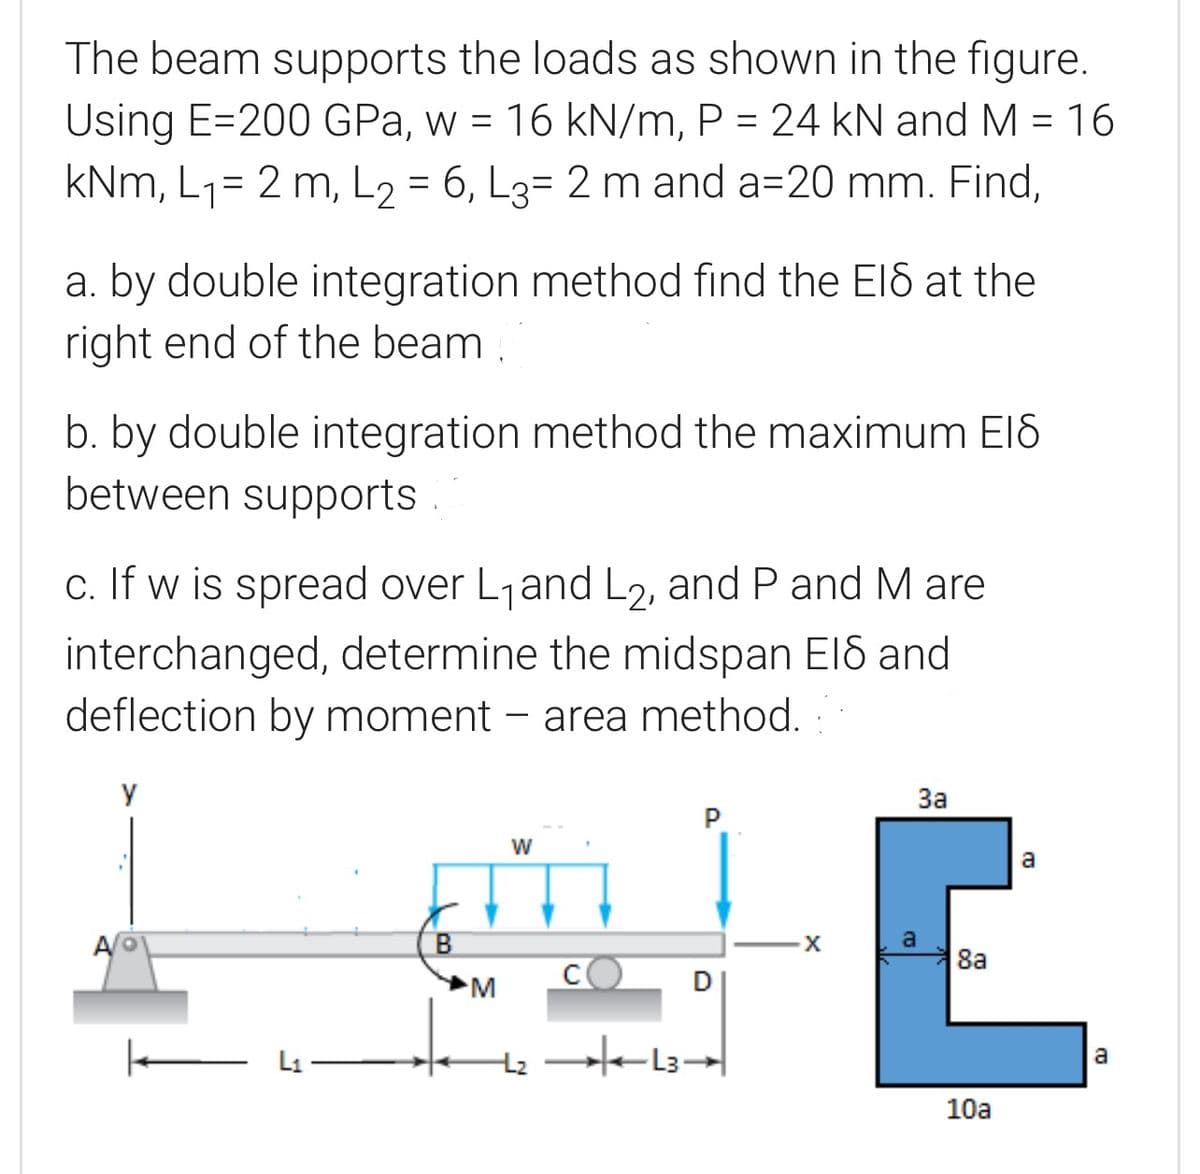 The beam supports the loads as shown in the figure.
Using E=200 GPa, w = 16 kN/m, P = 24 kN and M = 16
kNm, L1= 2 m, L2 = 6, L3= 2 m and a=20 mm. Find,
a. by double integration method find the ElS at the
right end of the beam
b. by double integration method the maximum El8
between supports .
c. If w is spread over L1and L2, and P and M are
interchanged, determine the midspan El8 and
deflection by moment – area method. :
y
За
P
a
8a
D
E Li
a
10a
